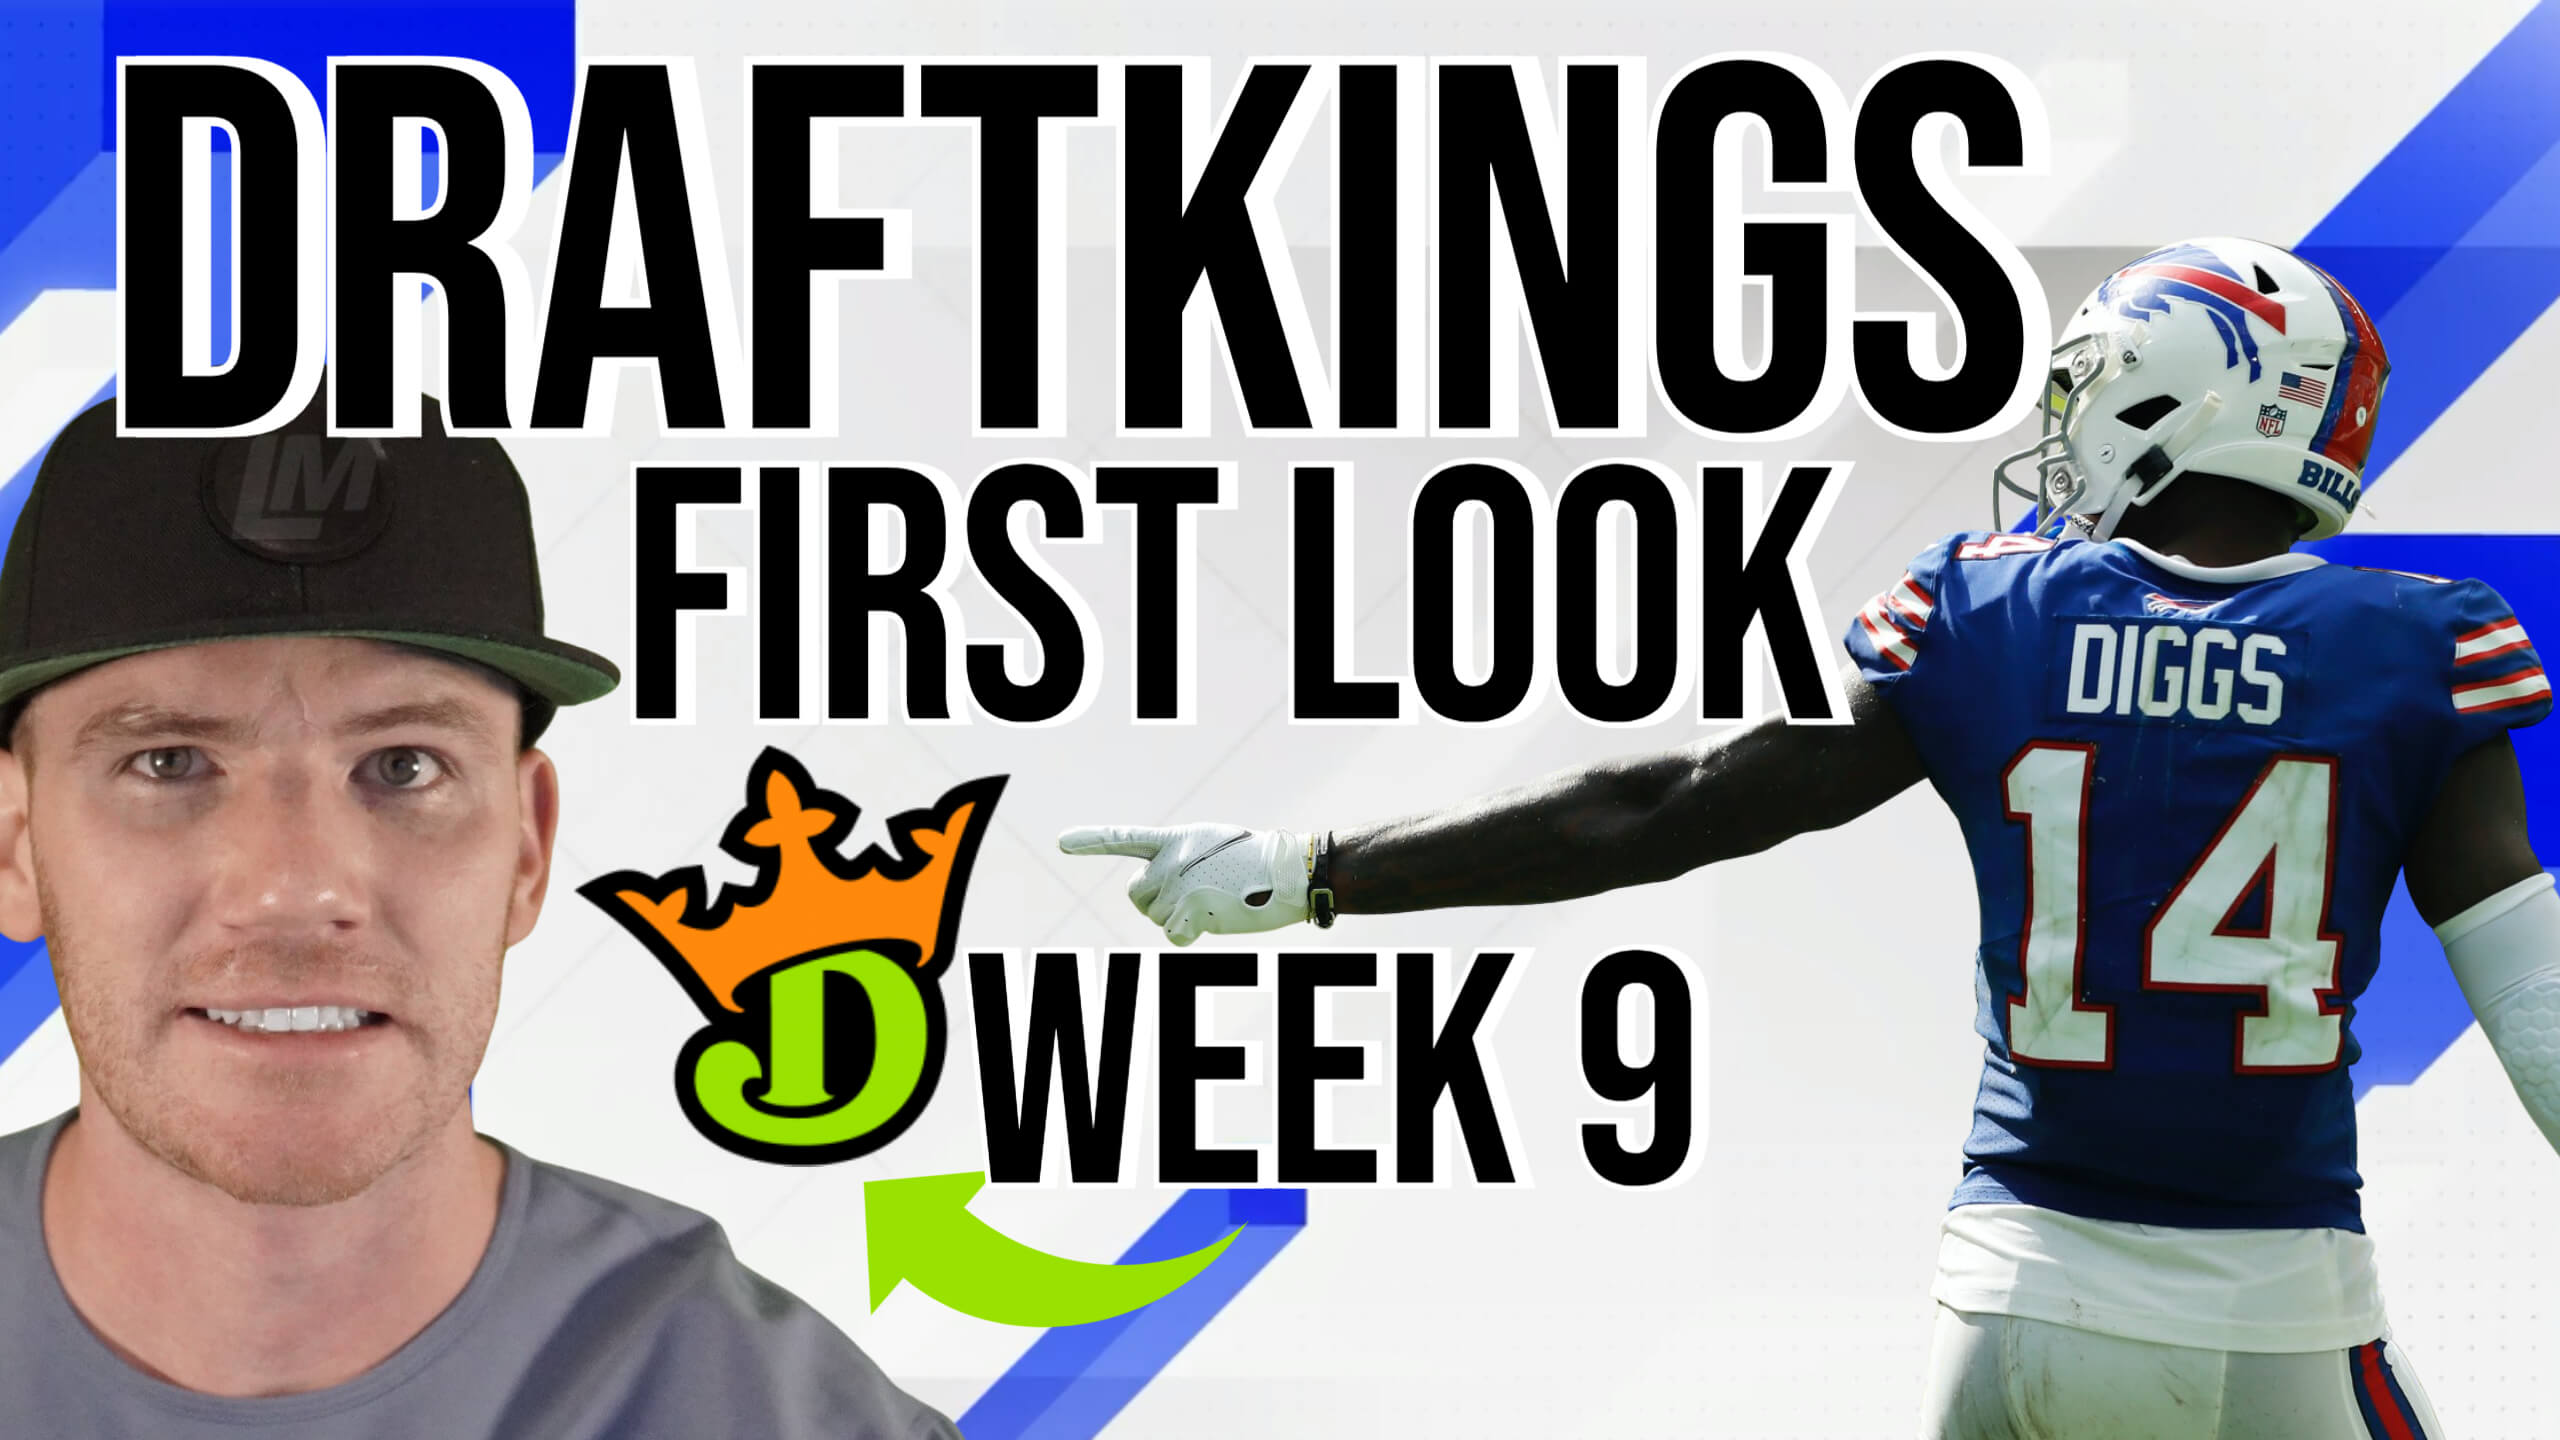 Early Week 9 NFL Picks and Betting Lines